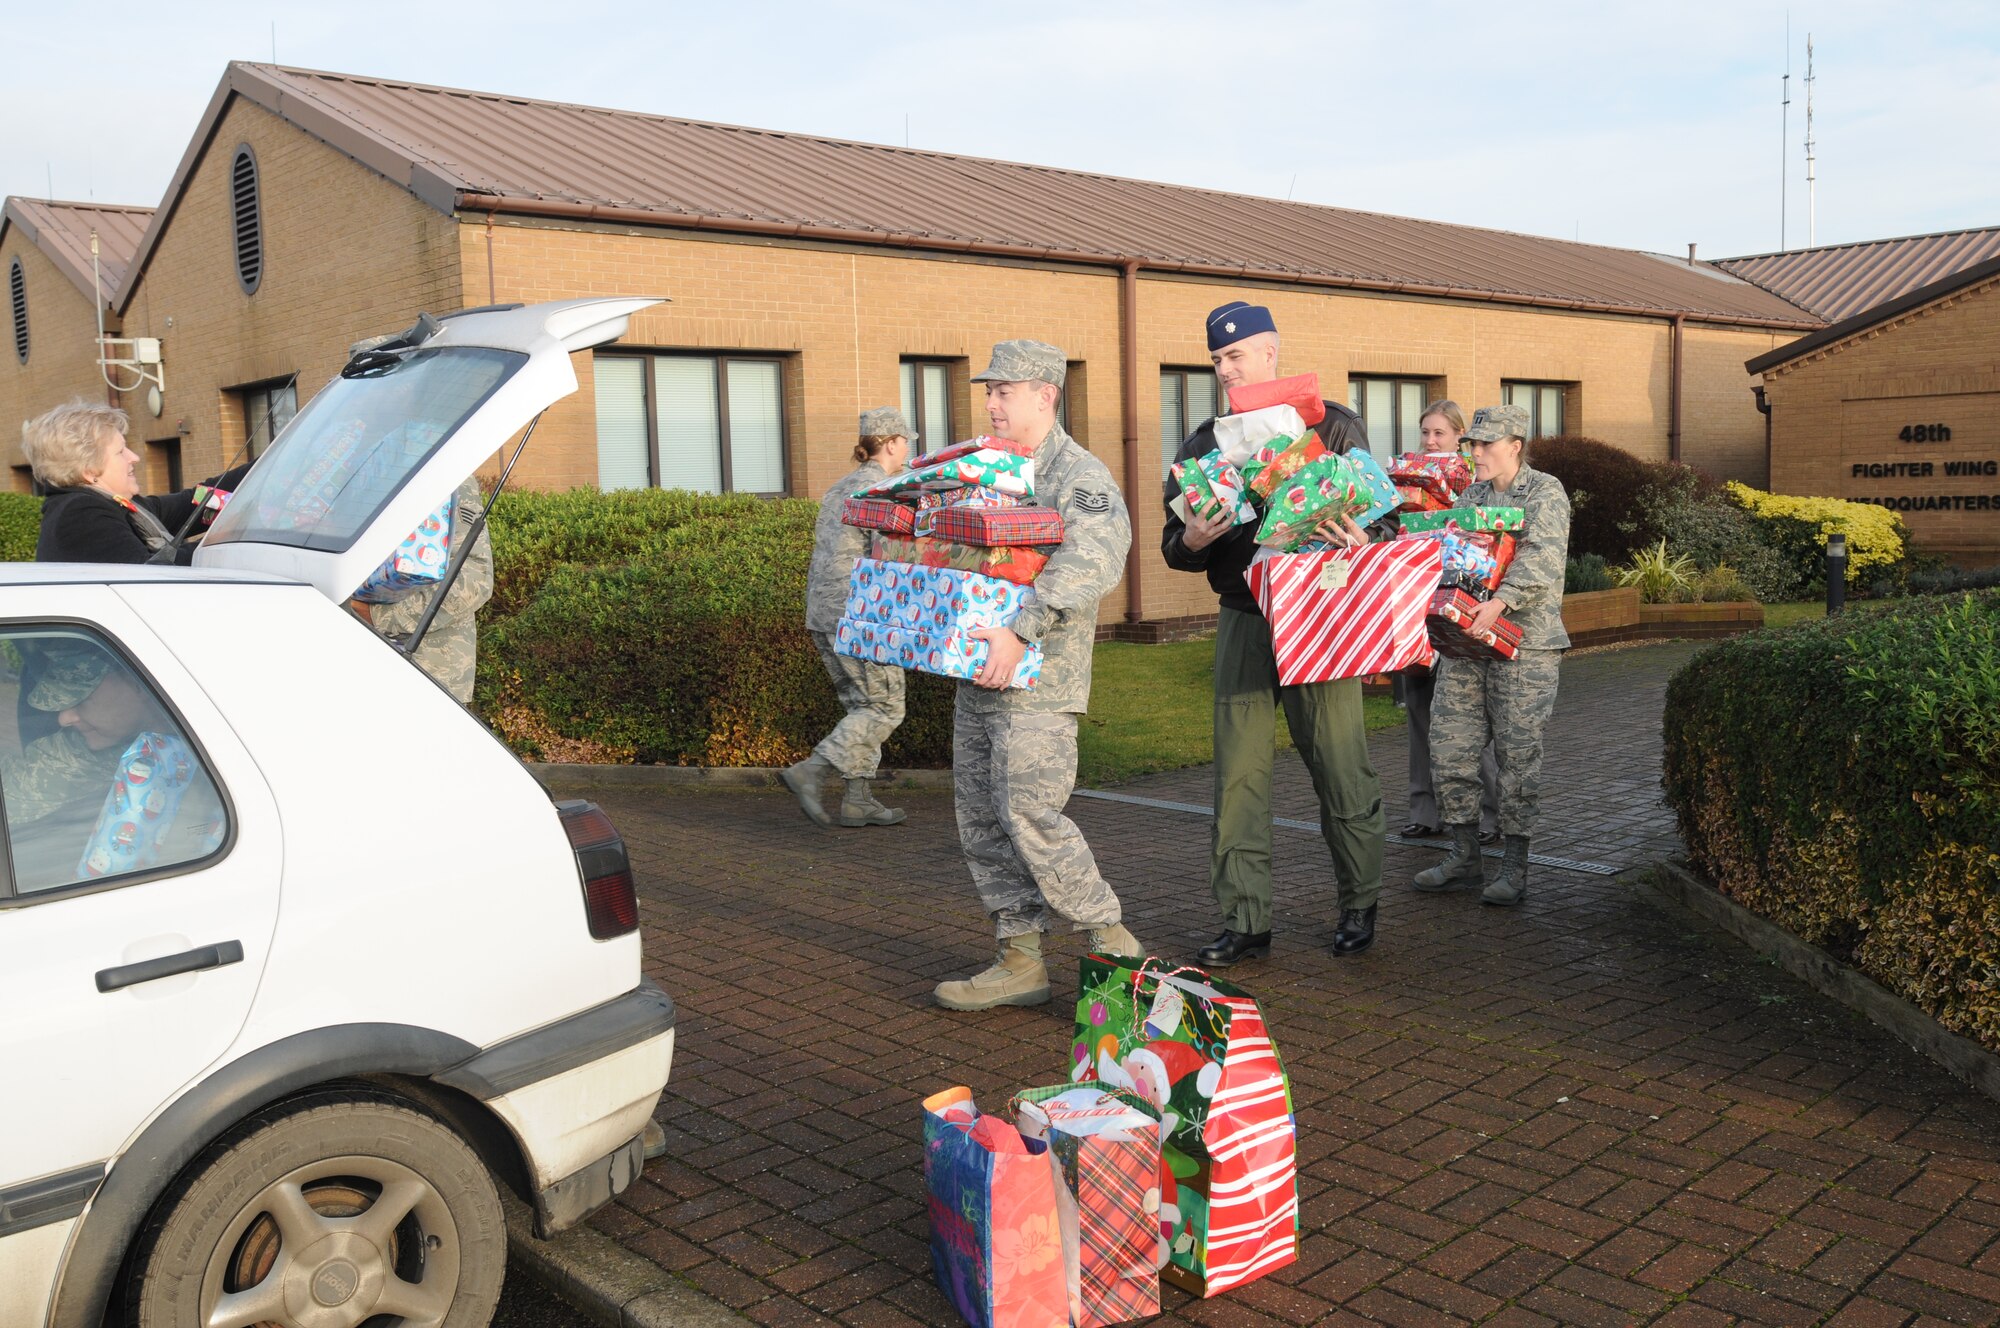 48th Fighter Wing personnel line up to help load a car with Christmas presents for the Sure Start Children’s Centre in Thetford. The Christmas presents were collected over a ten-day period and delivered to the children’s centre Dec. 18. (U.S. Air Force photo by Senior Airman Kristopher Levasseur)